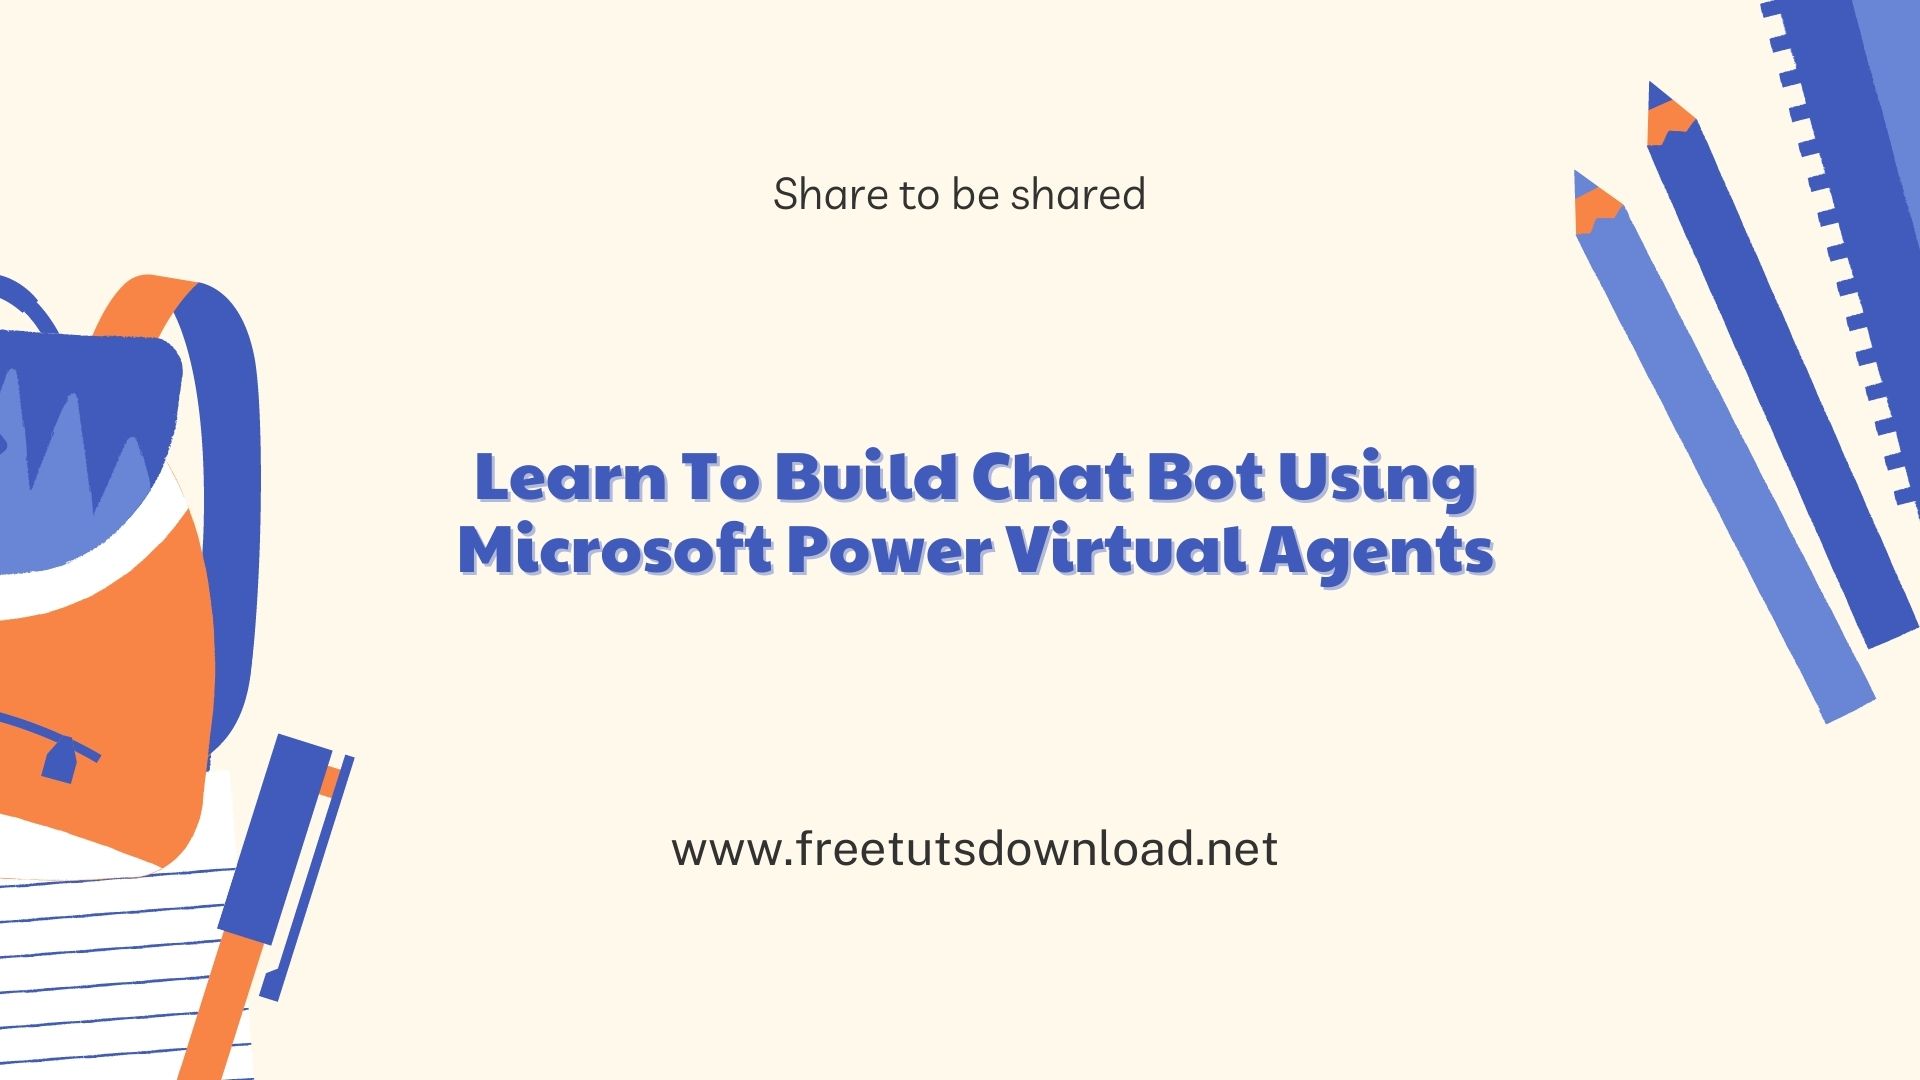 Learn To Build Chat Bot Using Microsoft Power Virtual Agents